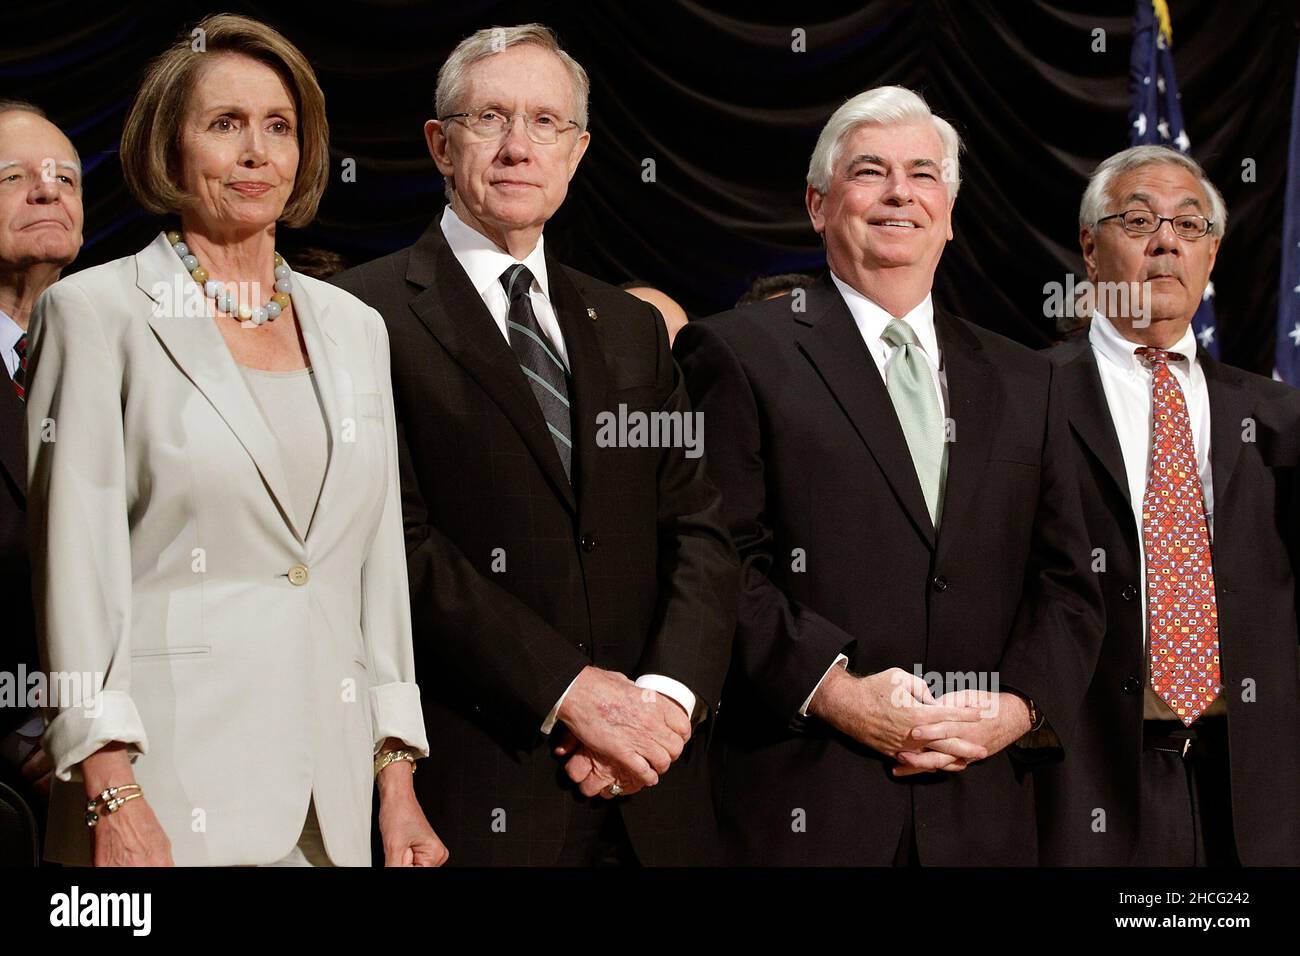 United States Speaker of the House Nancy Pelosi (D-CA), U.S. Senate Majority Leader Harry Reid (D-NV), U.S. Senate Banking Committee Chairman Christopher Dodd (D-CT) and U.S. House Financial Services Committee Chairman Barney Frank (D-MA) attend the signing ceremony for the financial reform bill into law during a ceremony with at the Ronald Reagan Building and International Trade Center, Wednesday, July 21, 2010 in Washington, DC. A sweeping expansion of federal financial regulation in the wake of the worst recession since the Great Depression, the bill will create a consumer protection agency Stock Photo